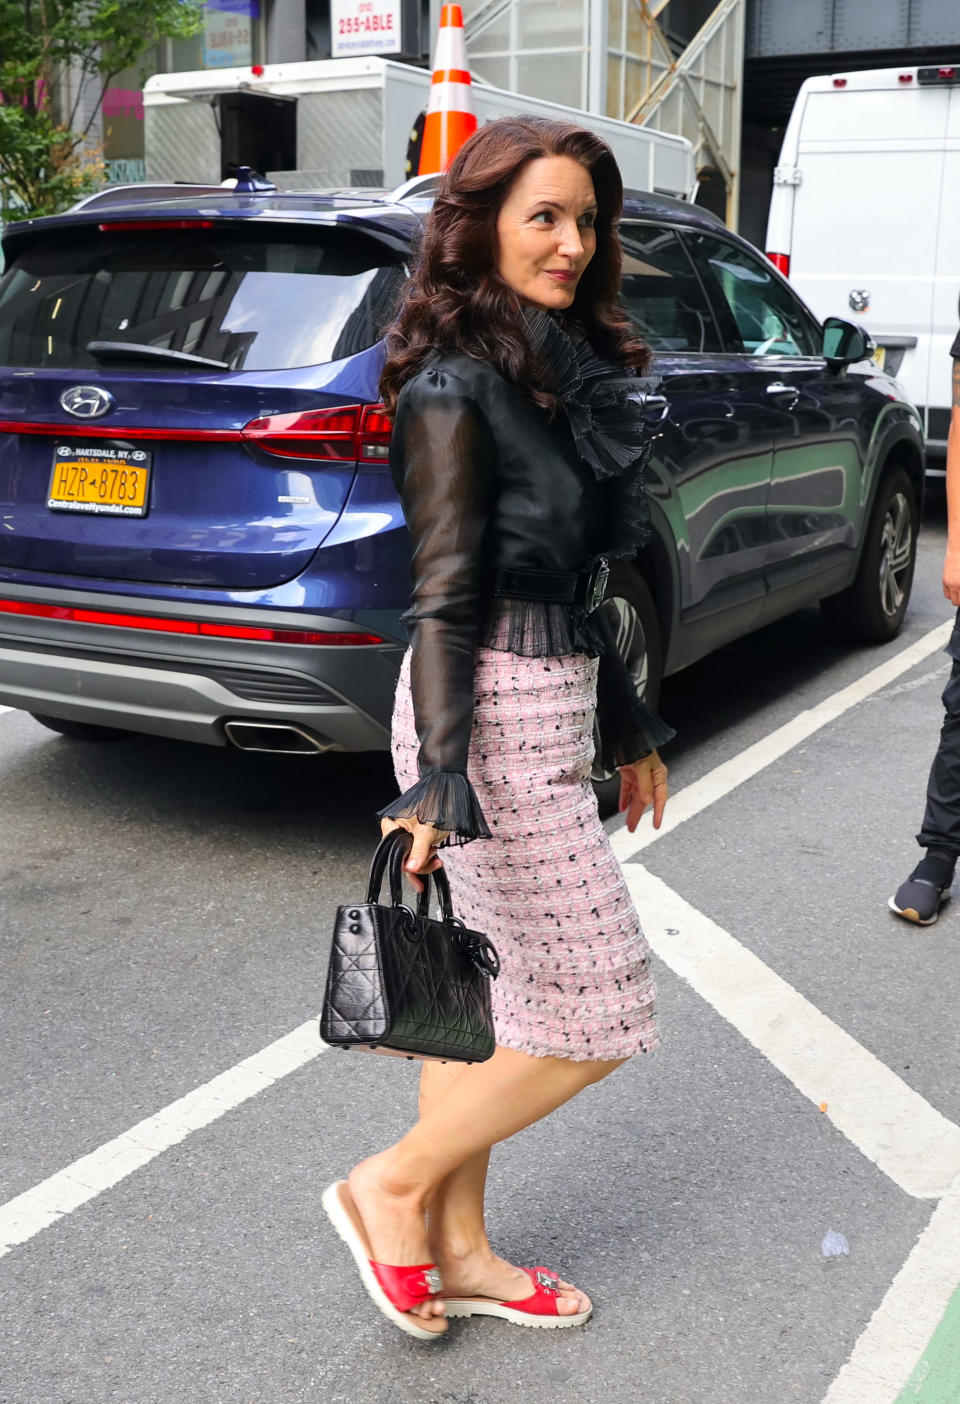 Kristin Davis is seen on the set of "And Just Like That..." in New York City wearing the Mules Coral Ginni from Dr. Scholl’s.